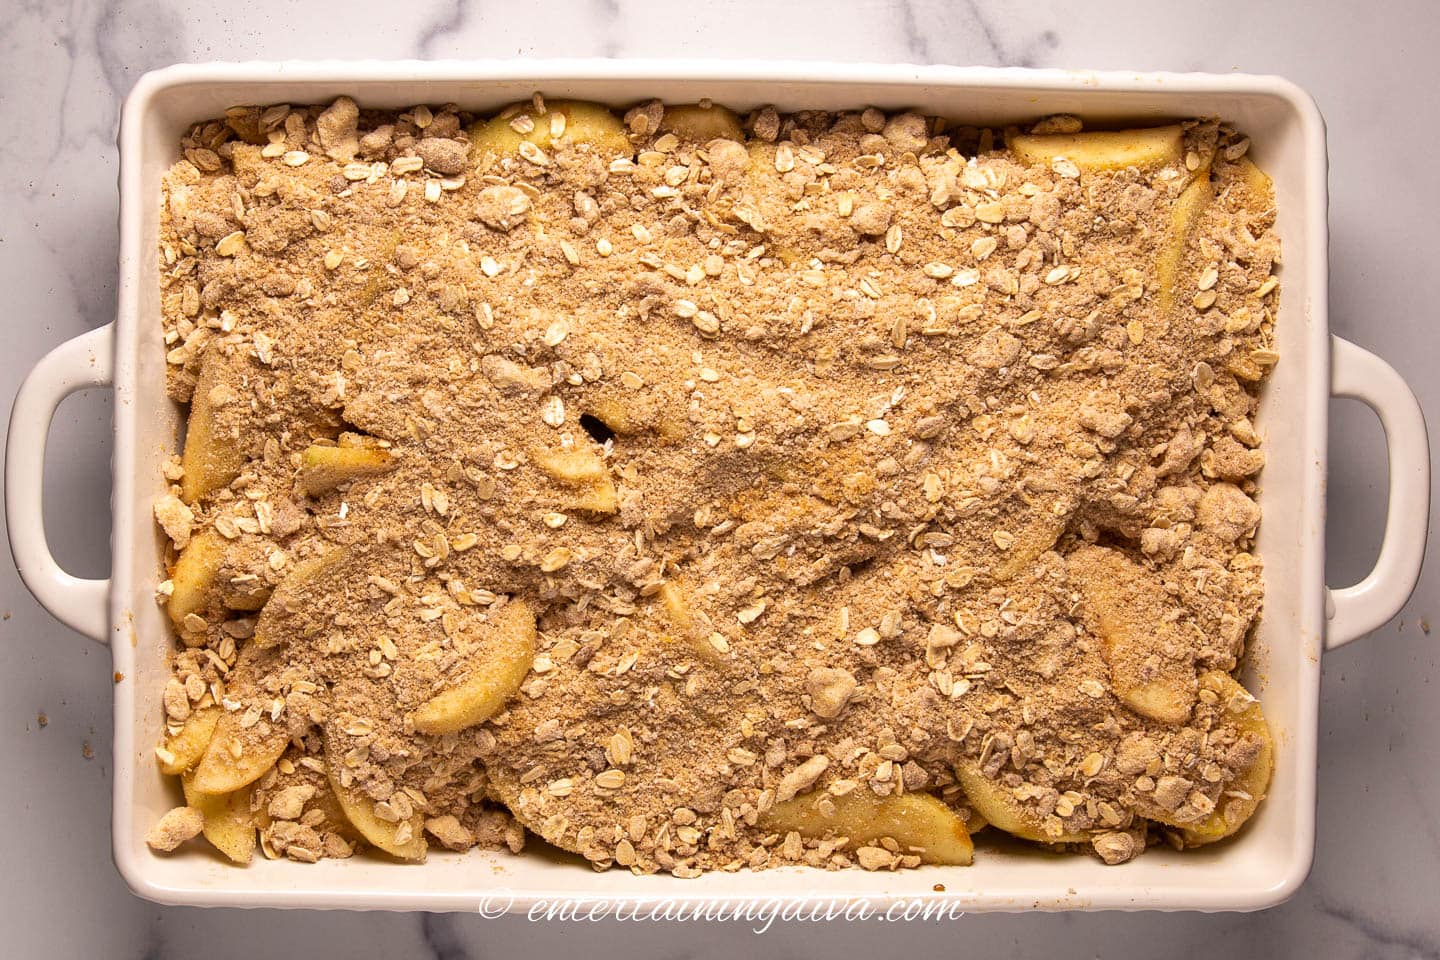 apples covered by oat topping in a baking dish before baking